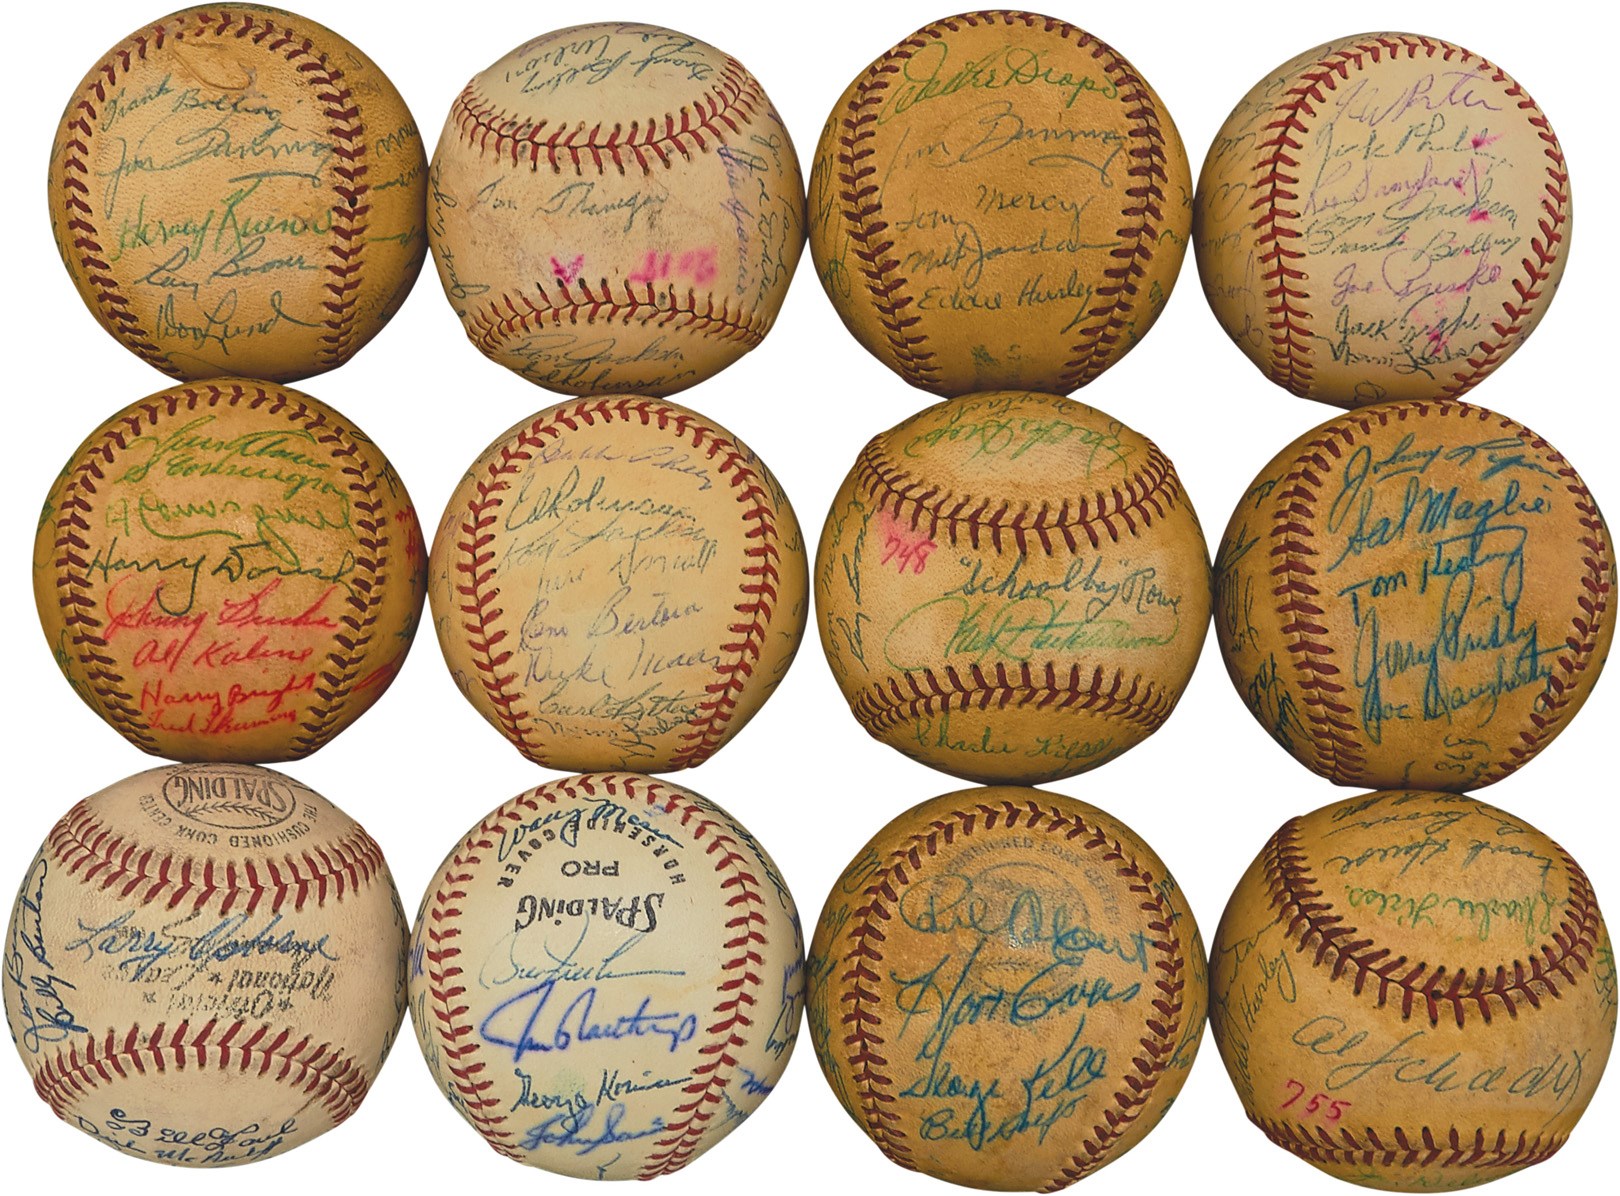 The John O'connor Signed Baseball Collection - 1950s-60s Detroit Tigers Team-Signed Baseballs (12)